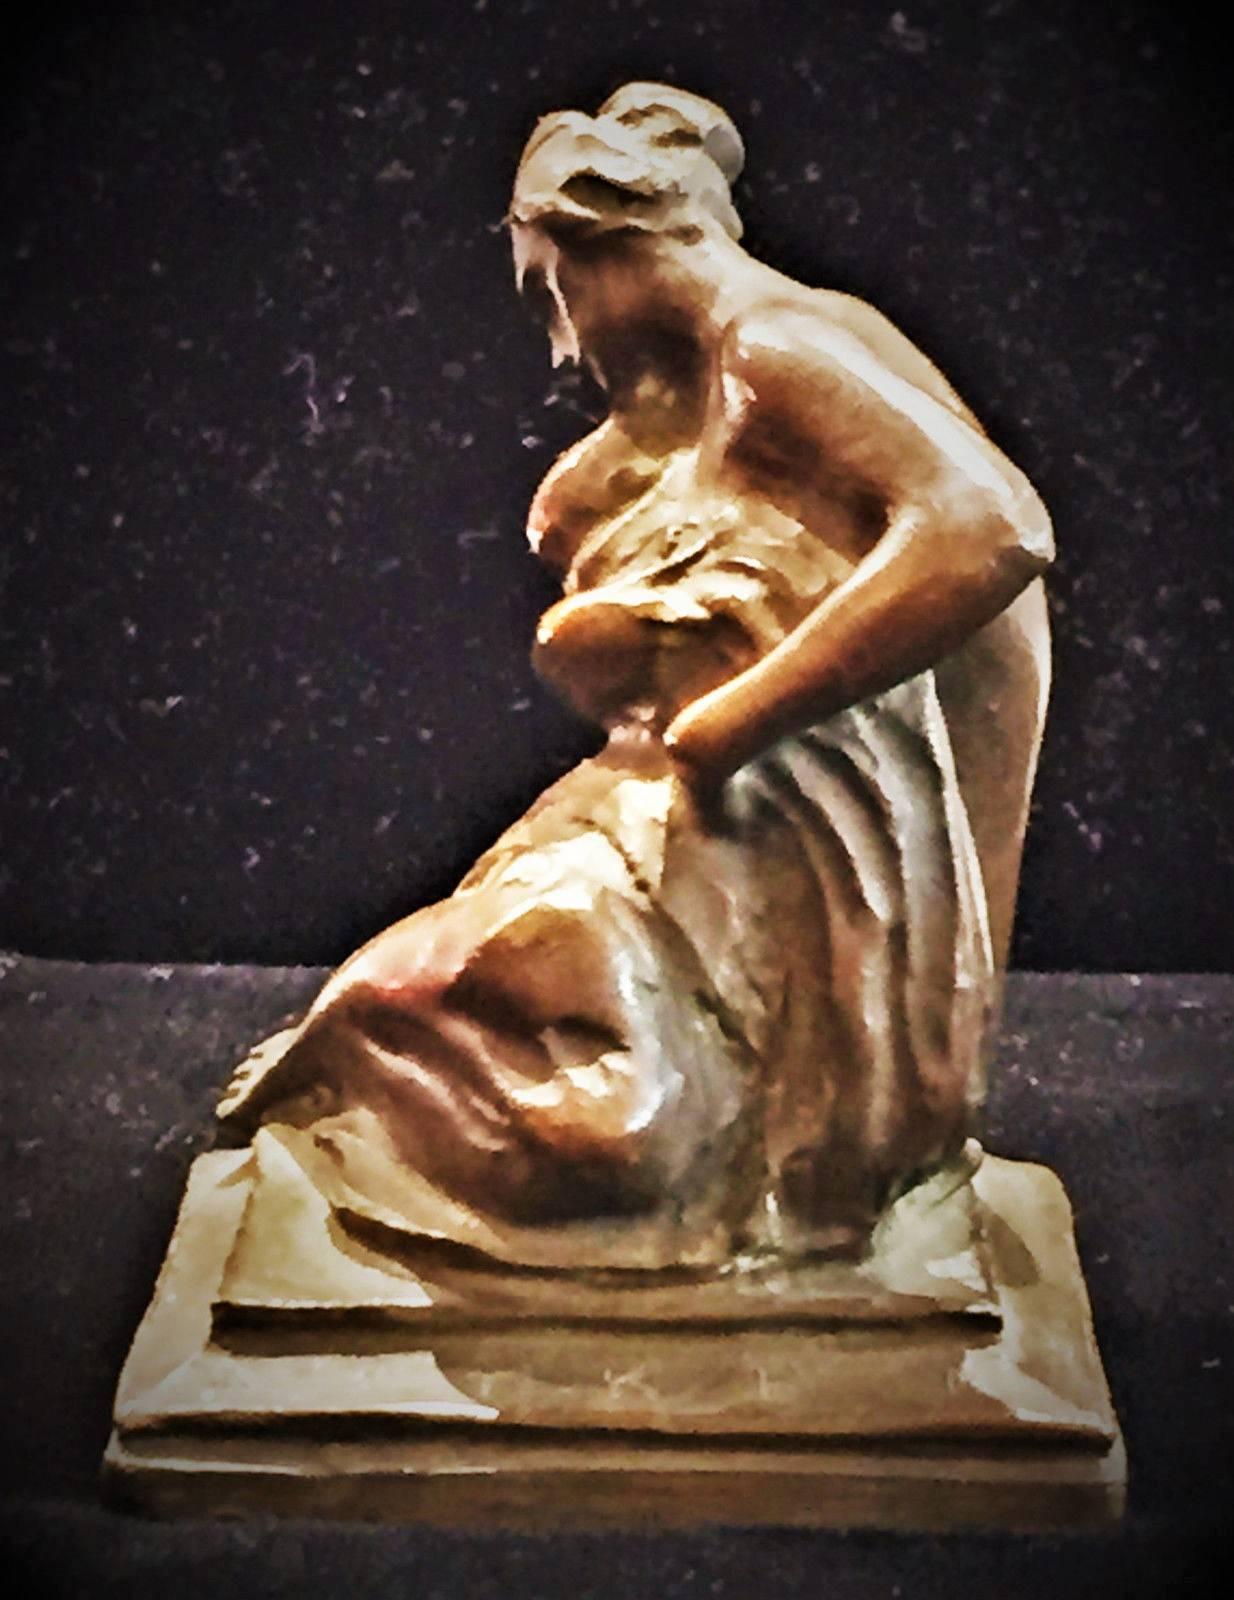 The nurturing young mother depicted in the nude, resting on the ground and cradling her infant. The sculpture is signed by the artist on the plinth of a stepped square base.

Robert Ingersoll Aitken (1878-1949), a noted American sculptor was born in